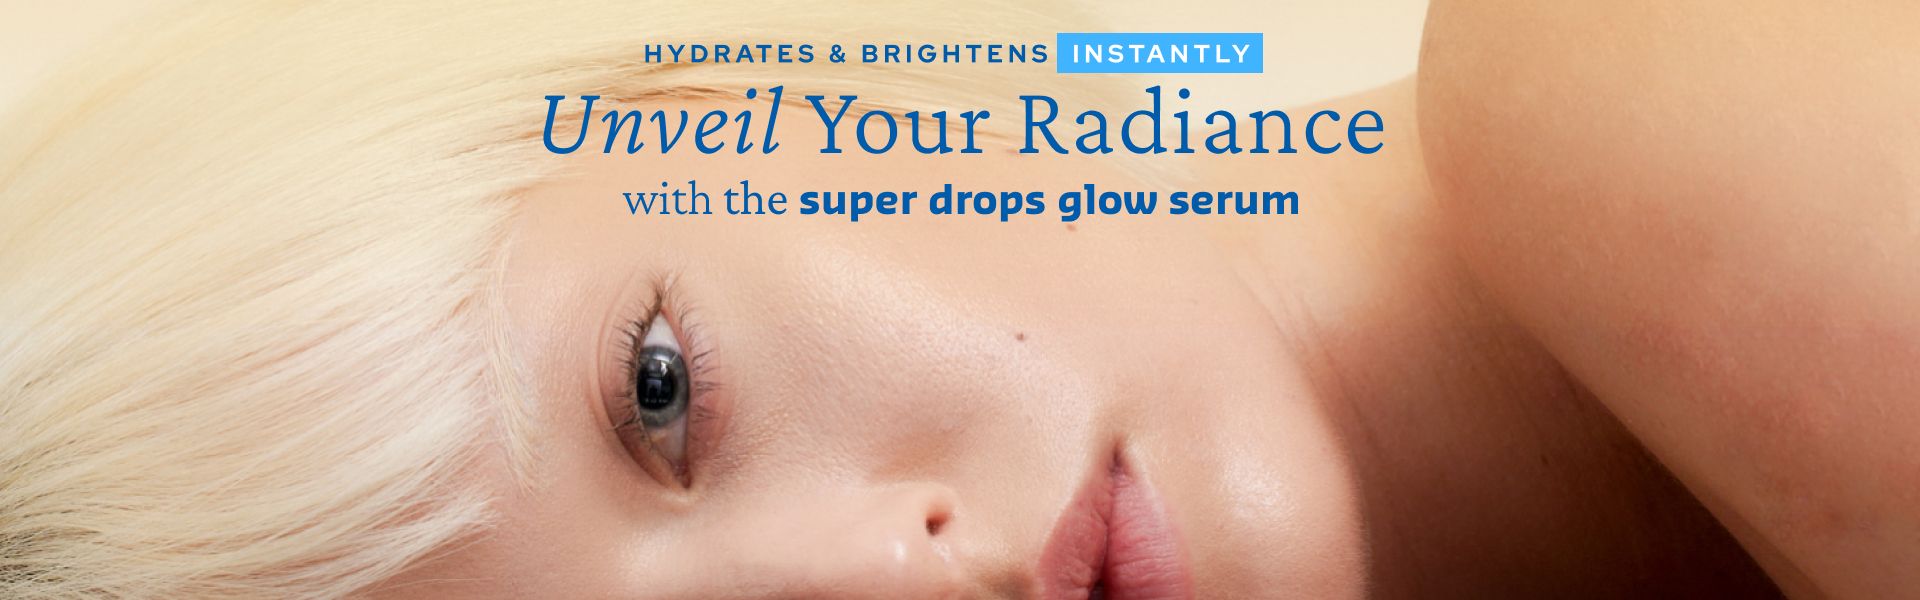 Close-up of a woman with short, blonde hair lying down with a visible eye and cheek. Text overlay reads: "Hydrates & Brightens Instantly. Unveil Your Radiance with the super drops glow serum.